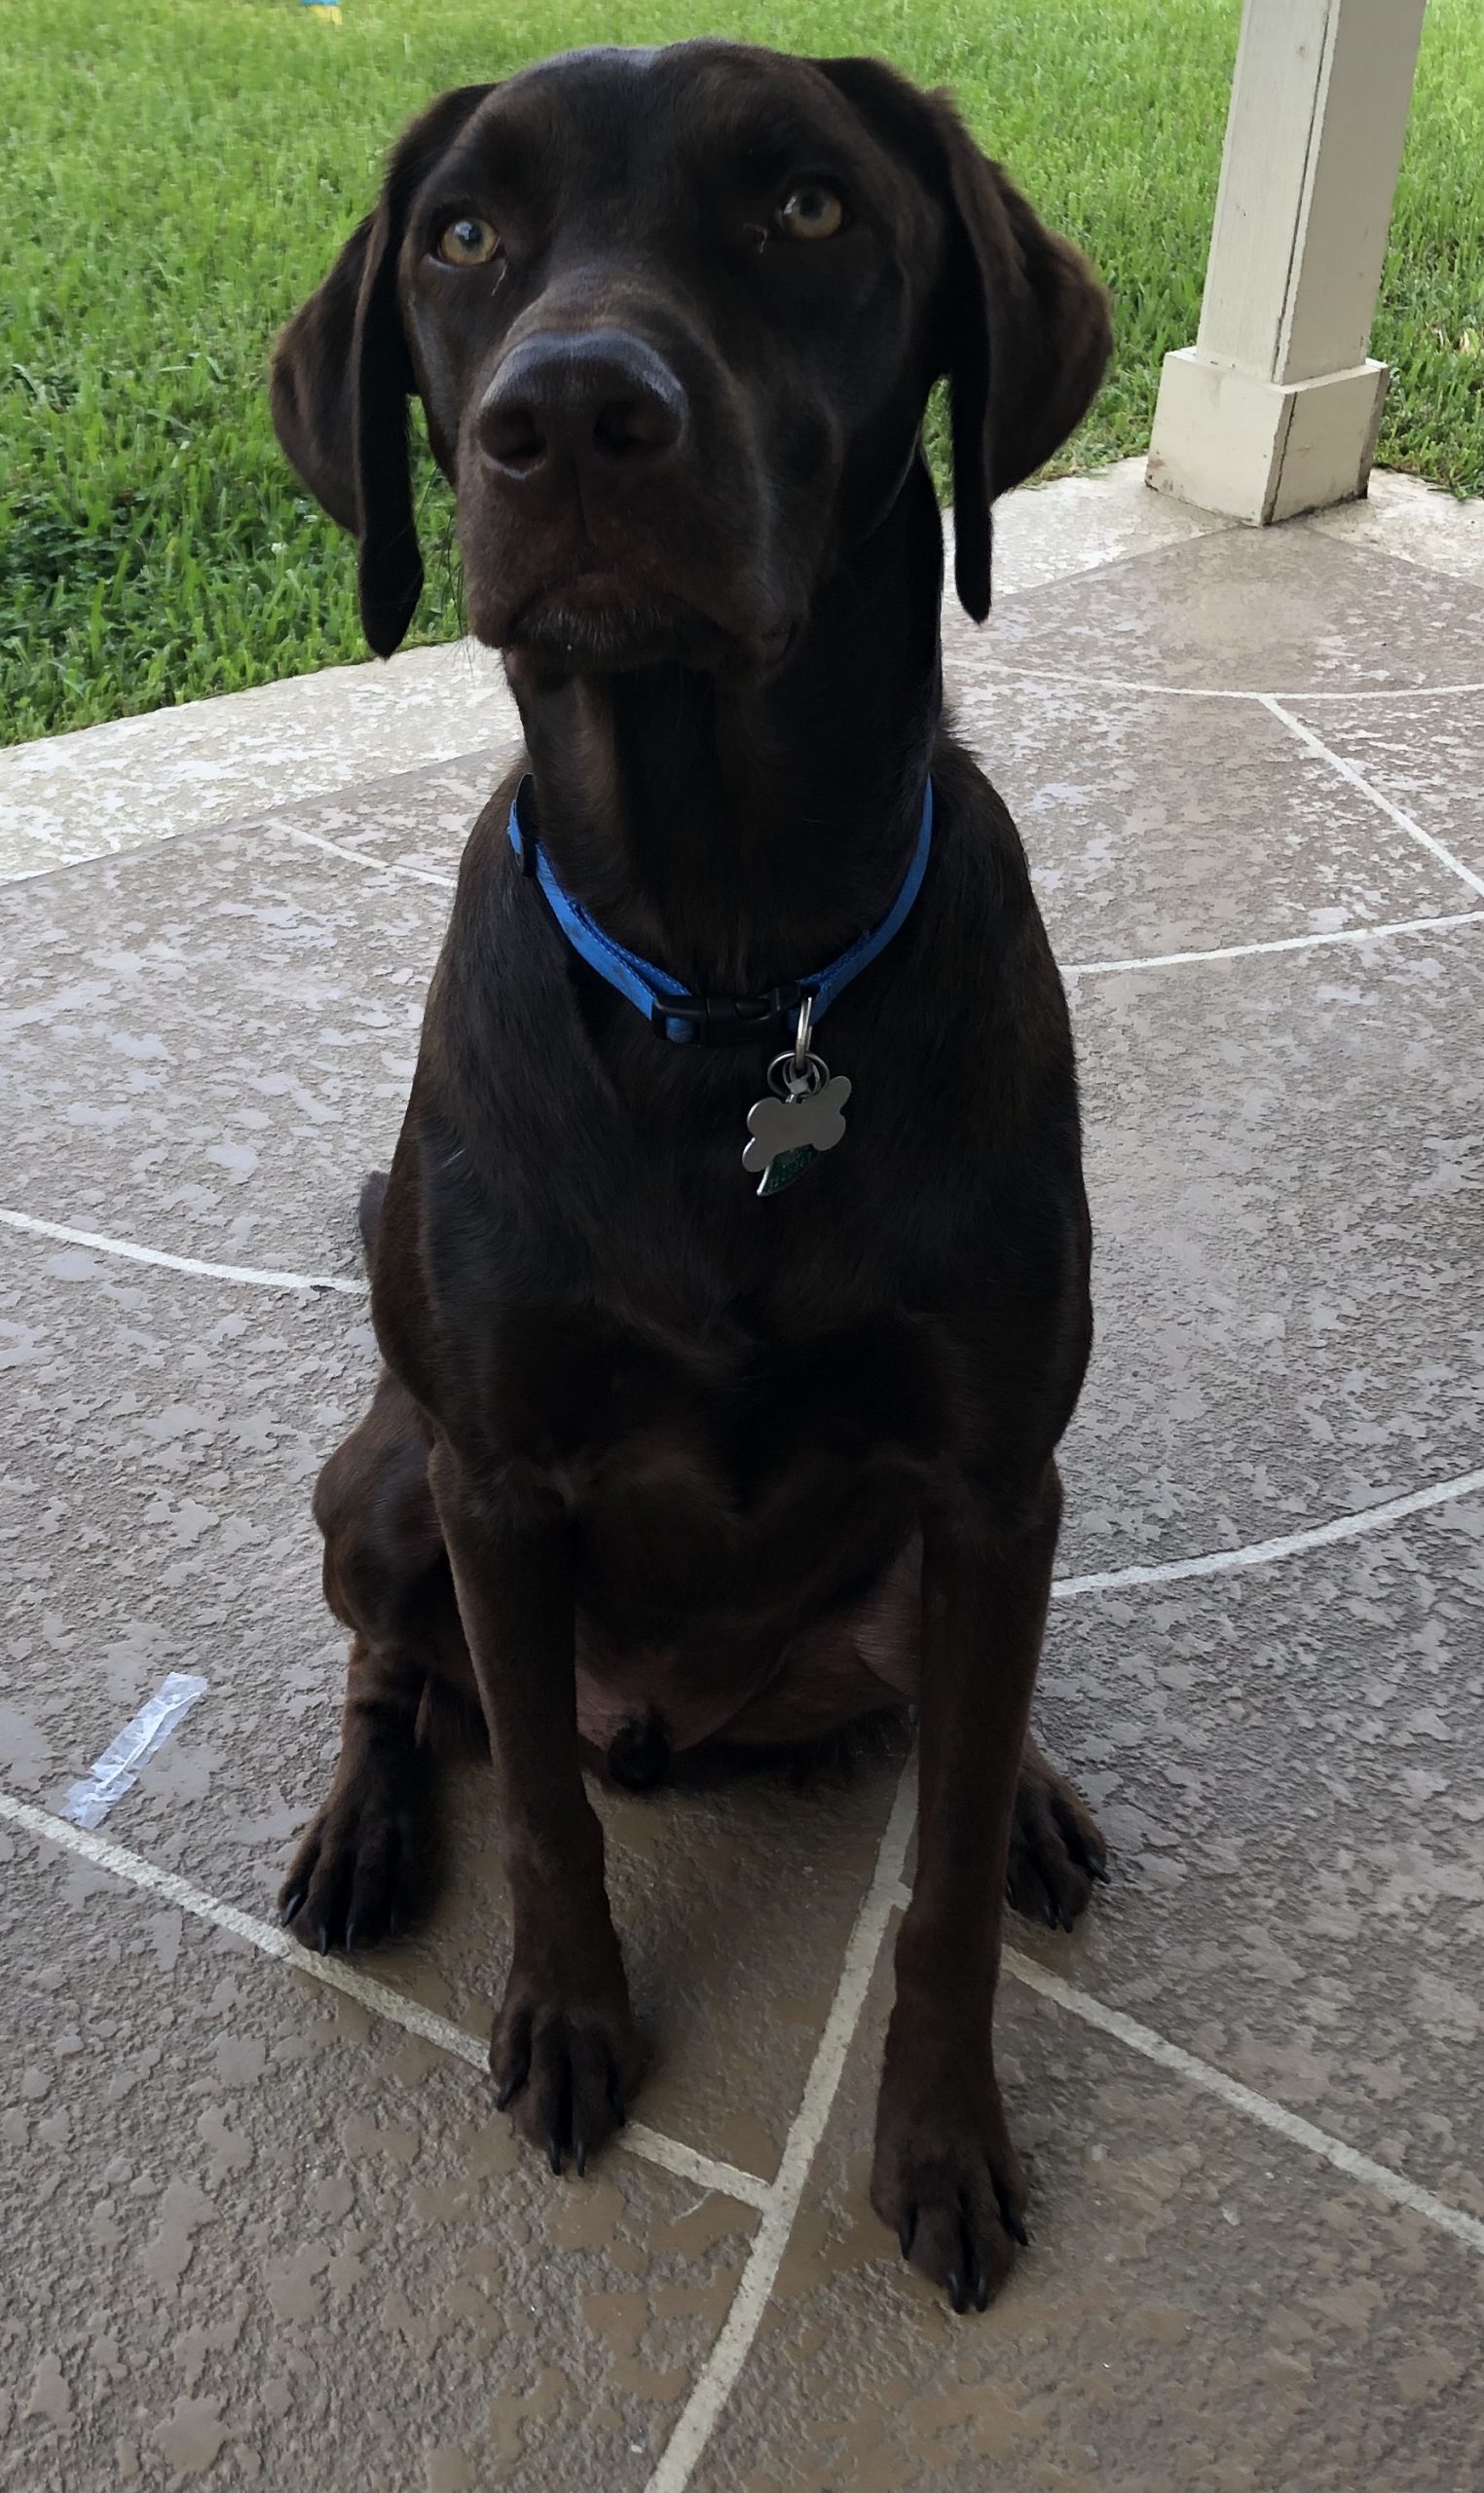 Brown lab sitting in an outdoor patio